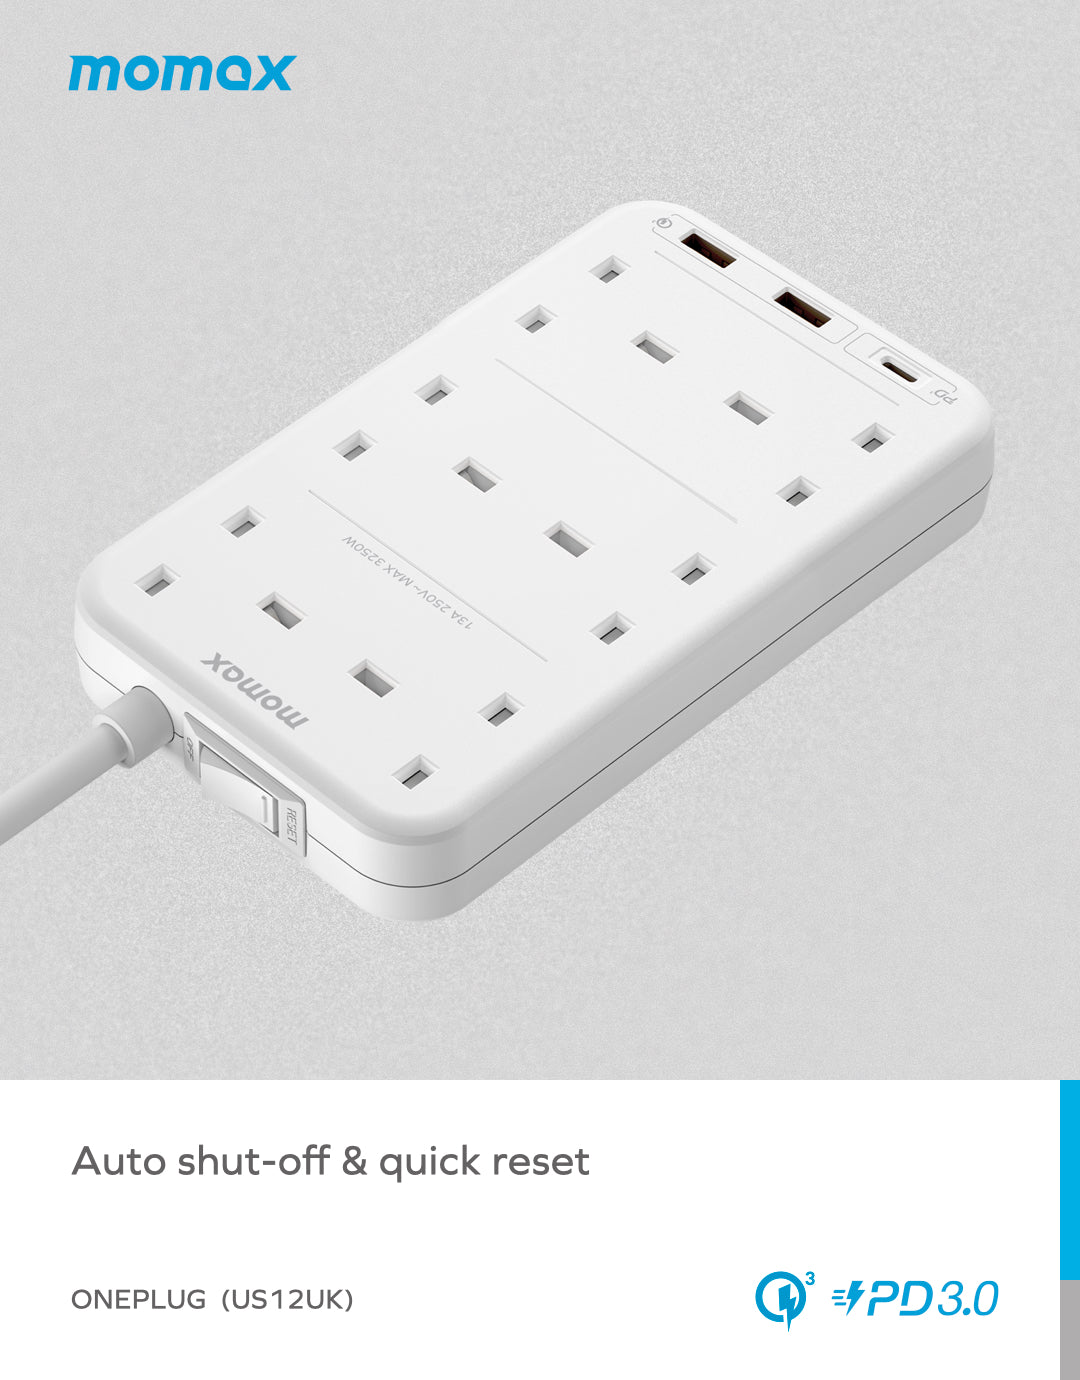 Oneplug | 6-Outlet Power Strip With USB